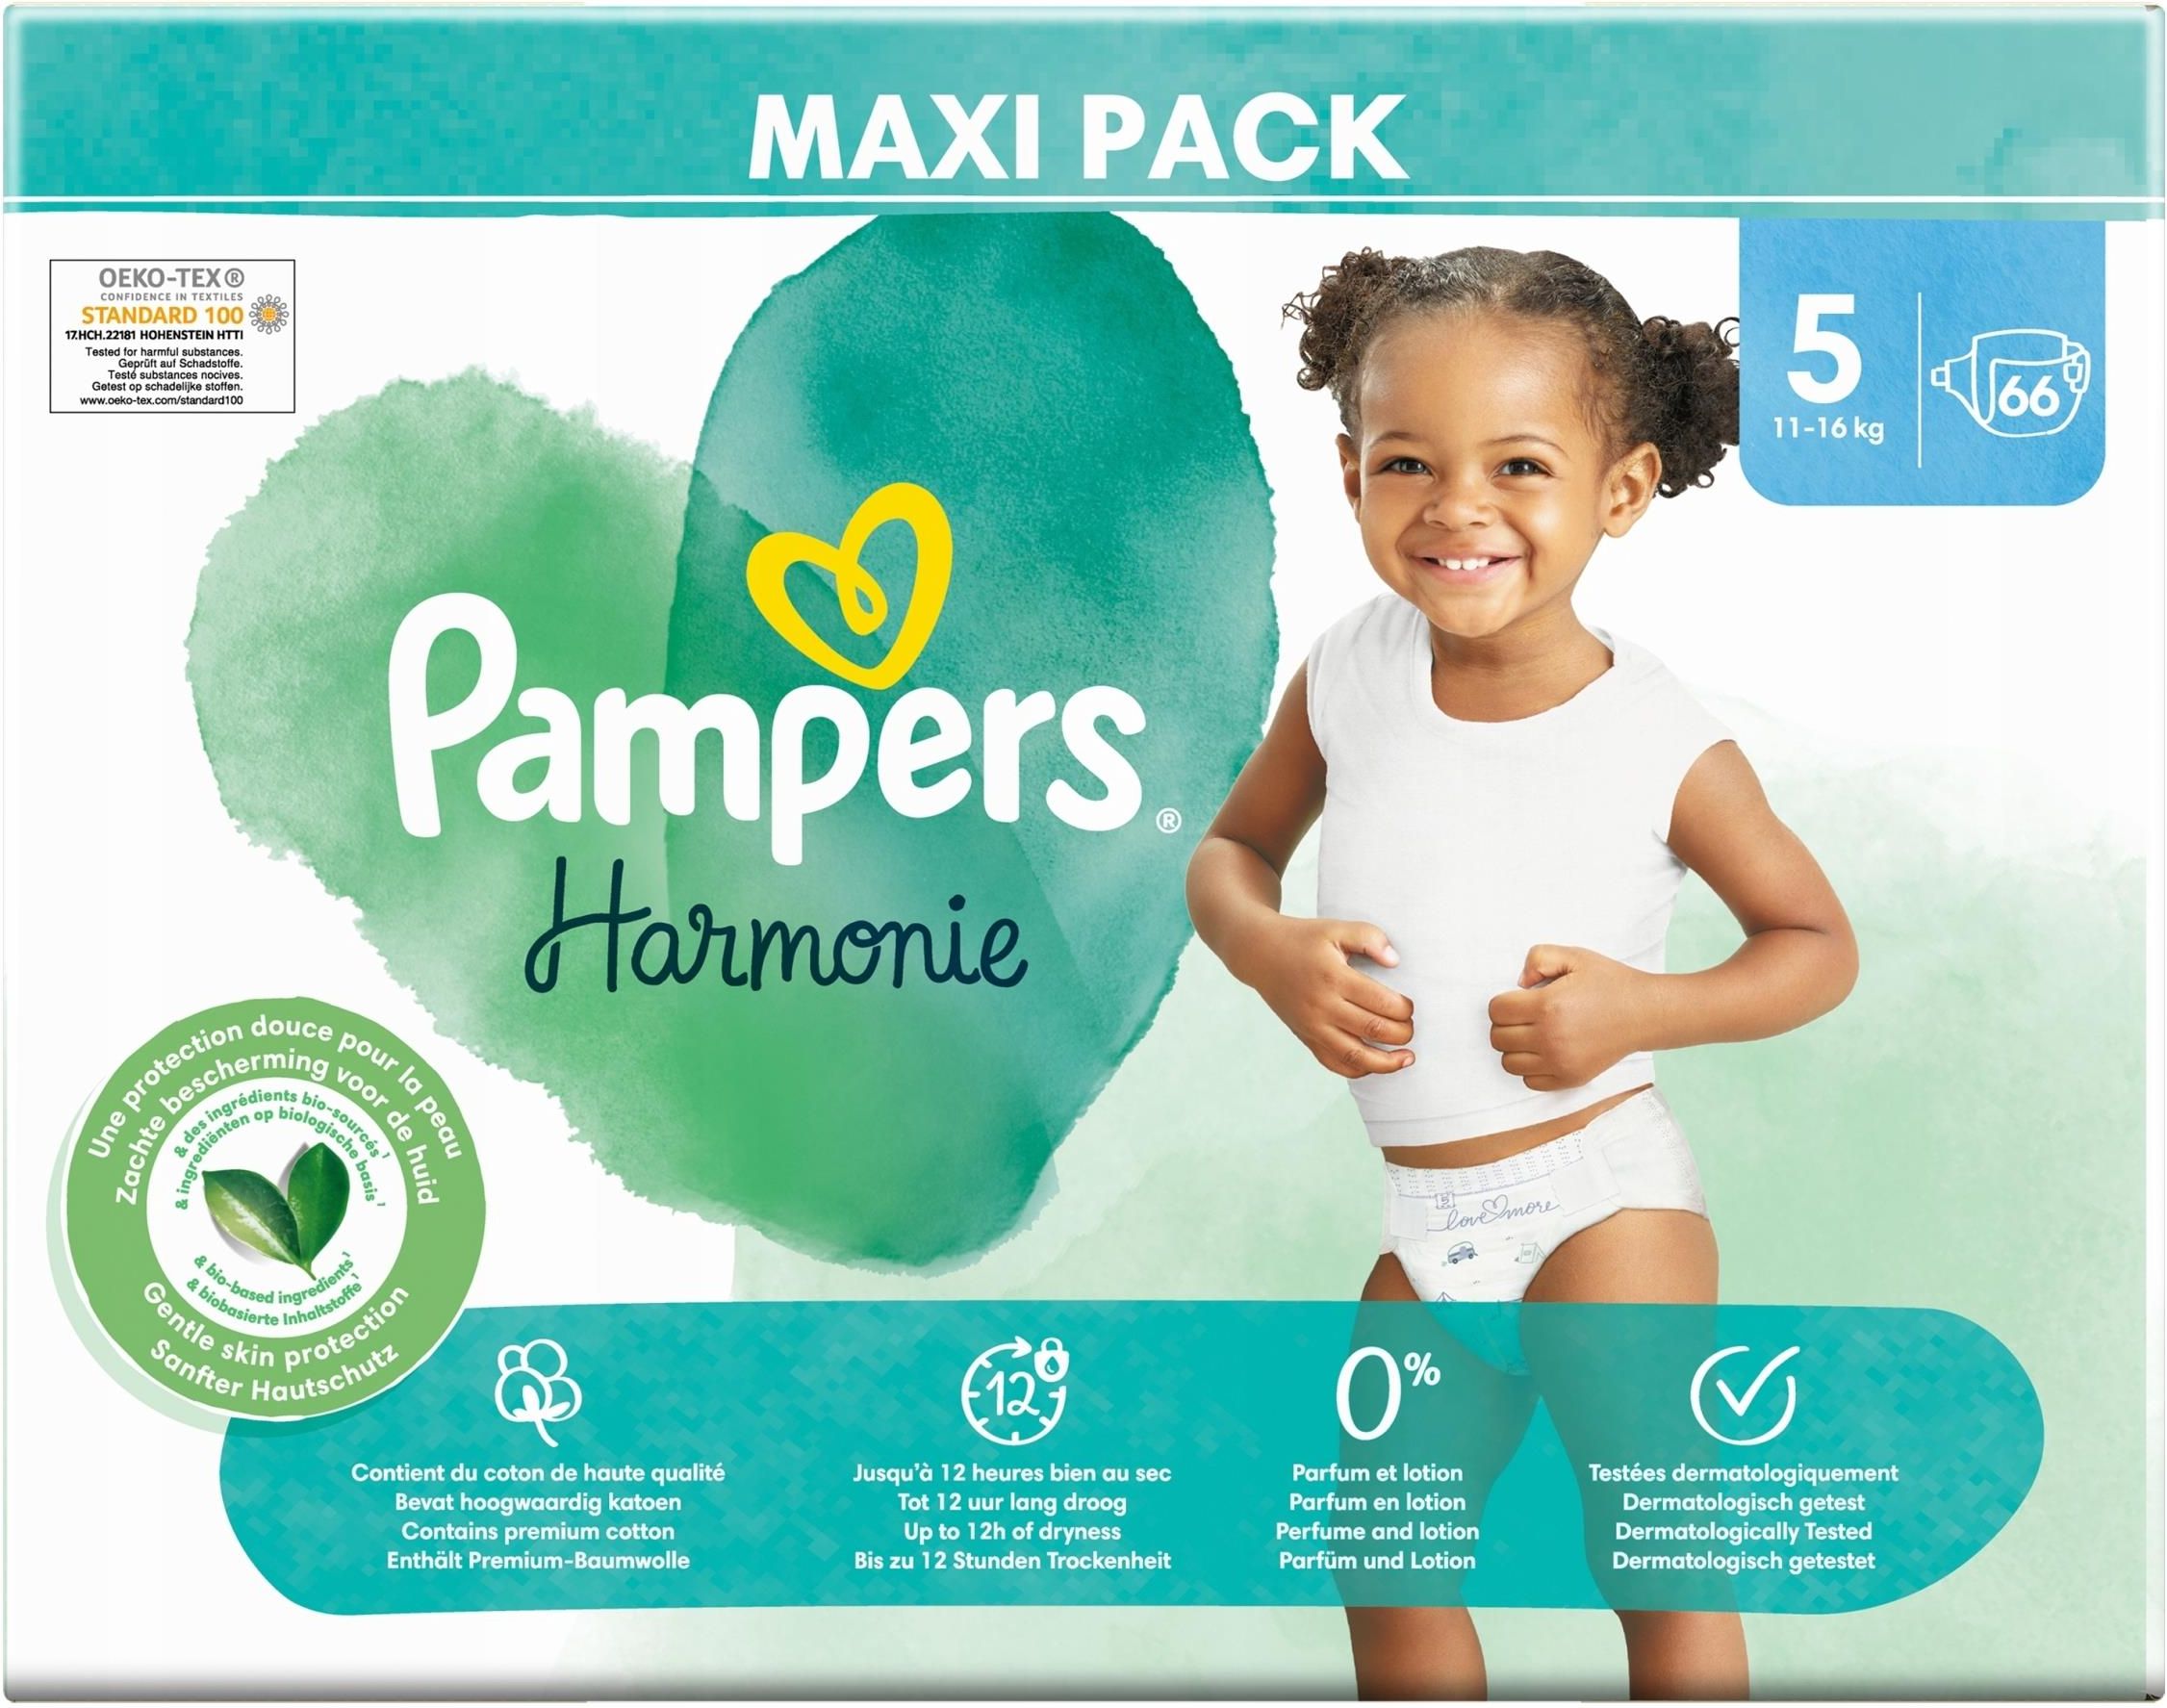 pampers 5 site ceneo.pl